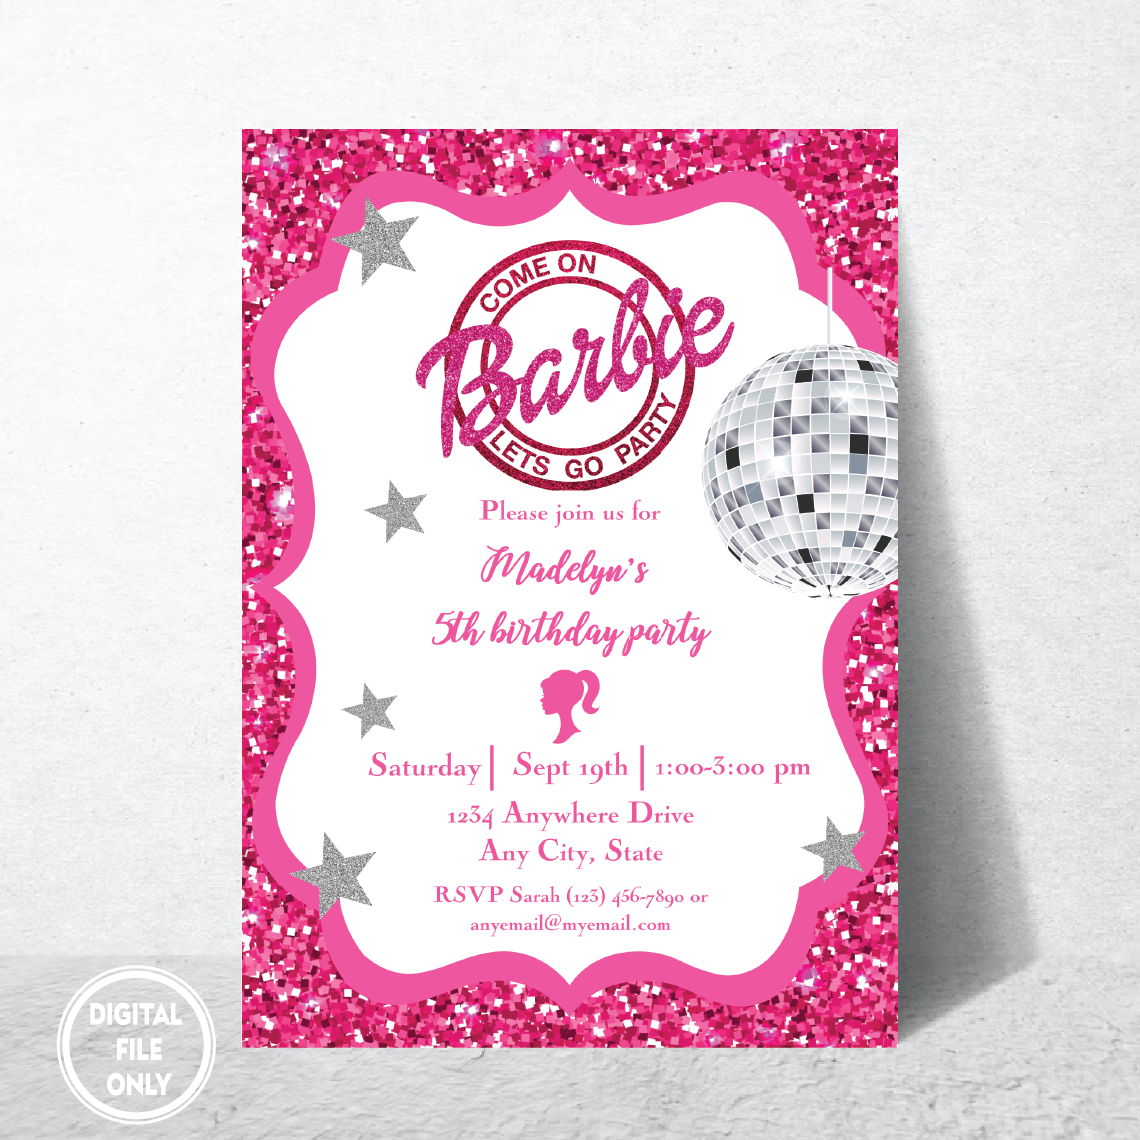 Personalized File Digital Girl's Birthday Party, Invitation for Girl Template Printable, Instant Download, Hot Pink Birthday Invite, Glitter Pink Invitation PNG File Only